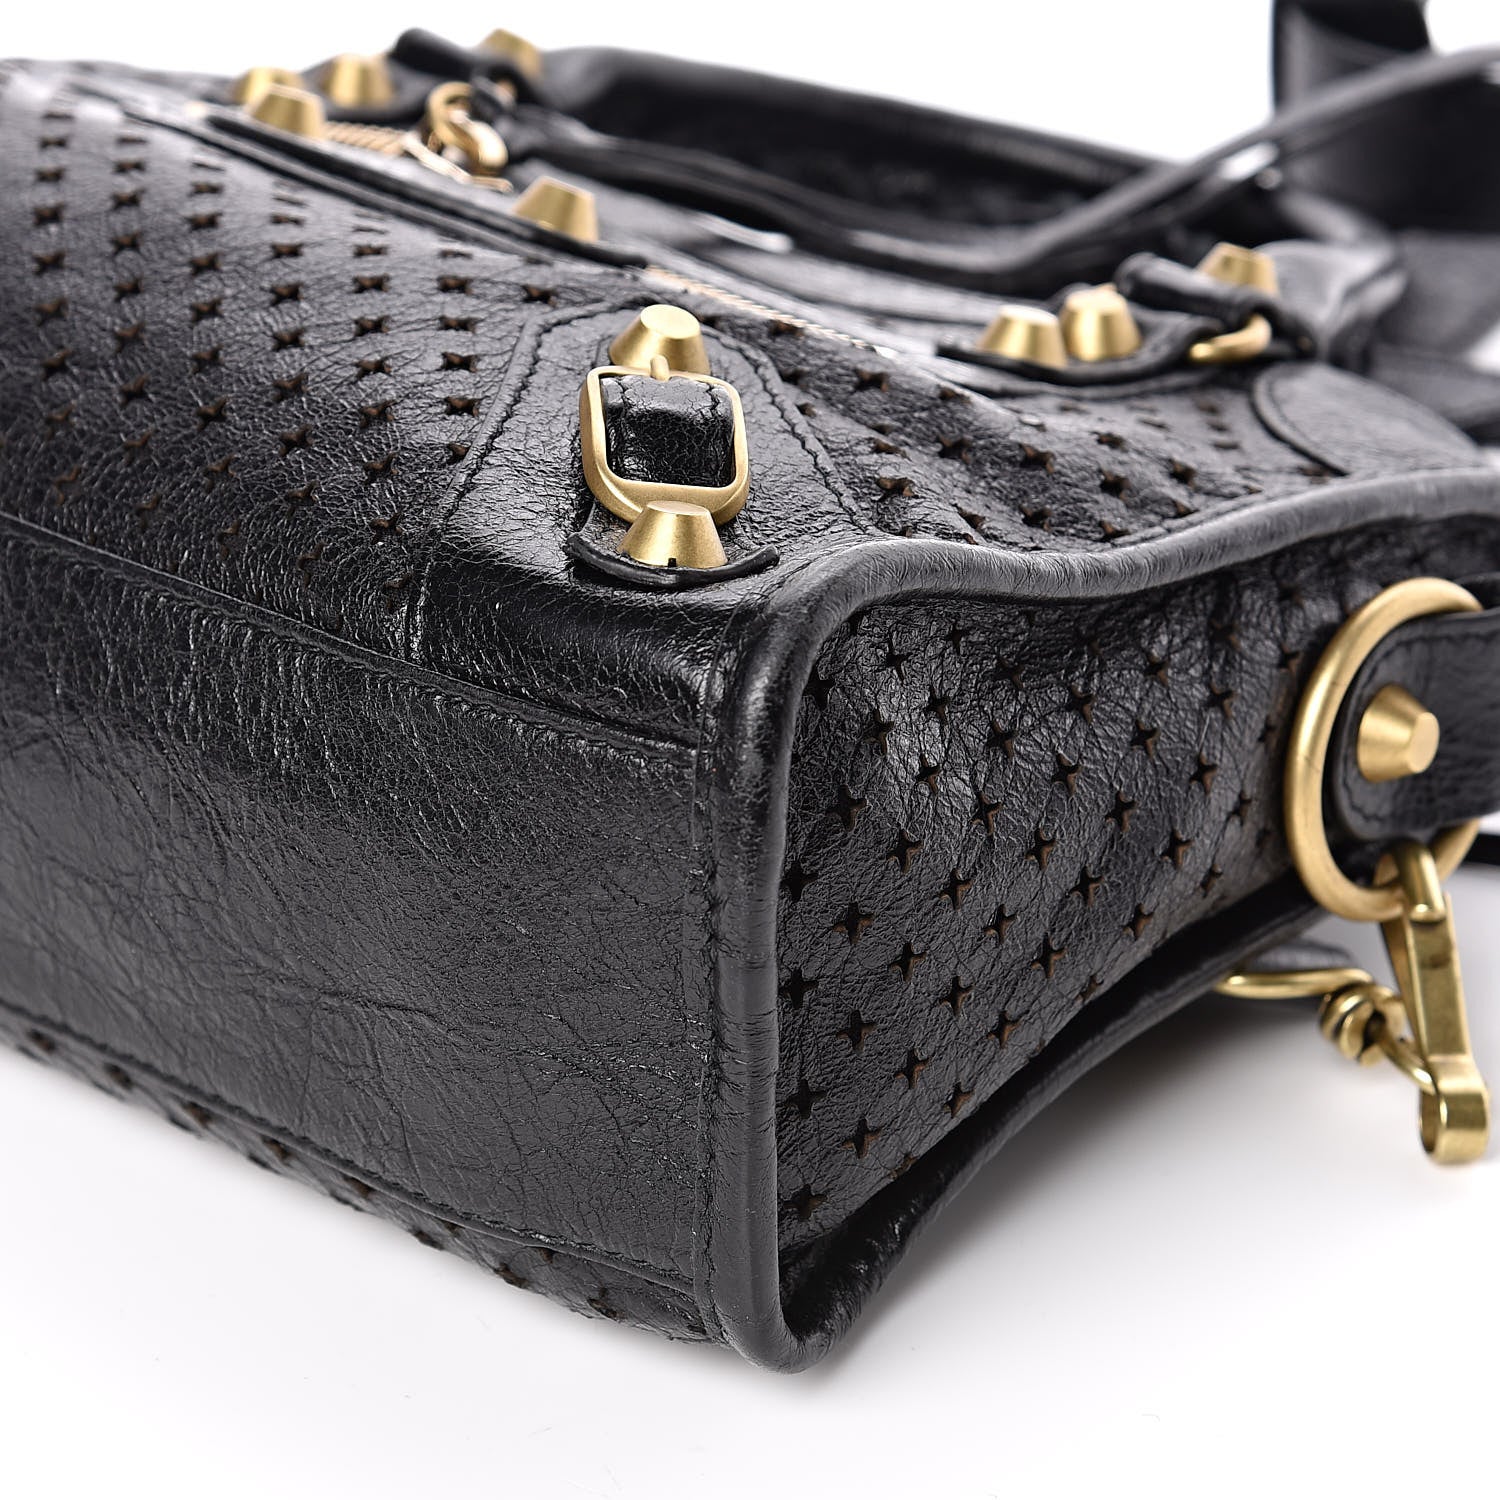 Balenciaga Classic City Black Leather Perforated Mini Satchel Bag 501065 at_Queen_Bee_of_Beverly_Hills